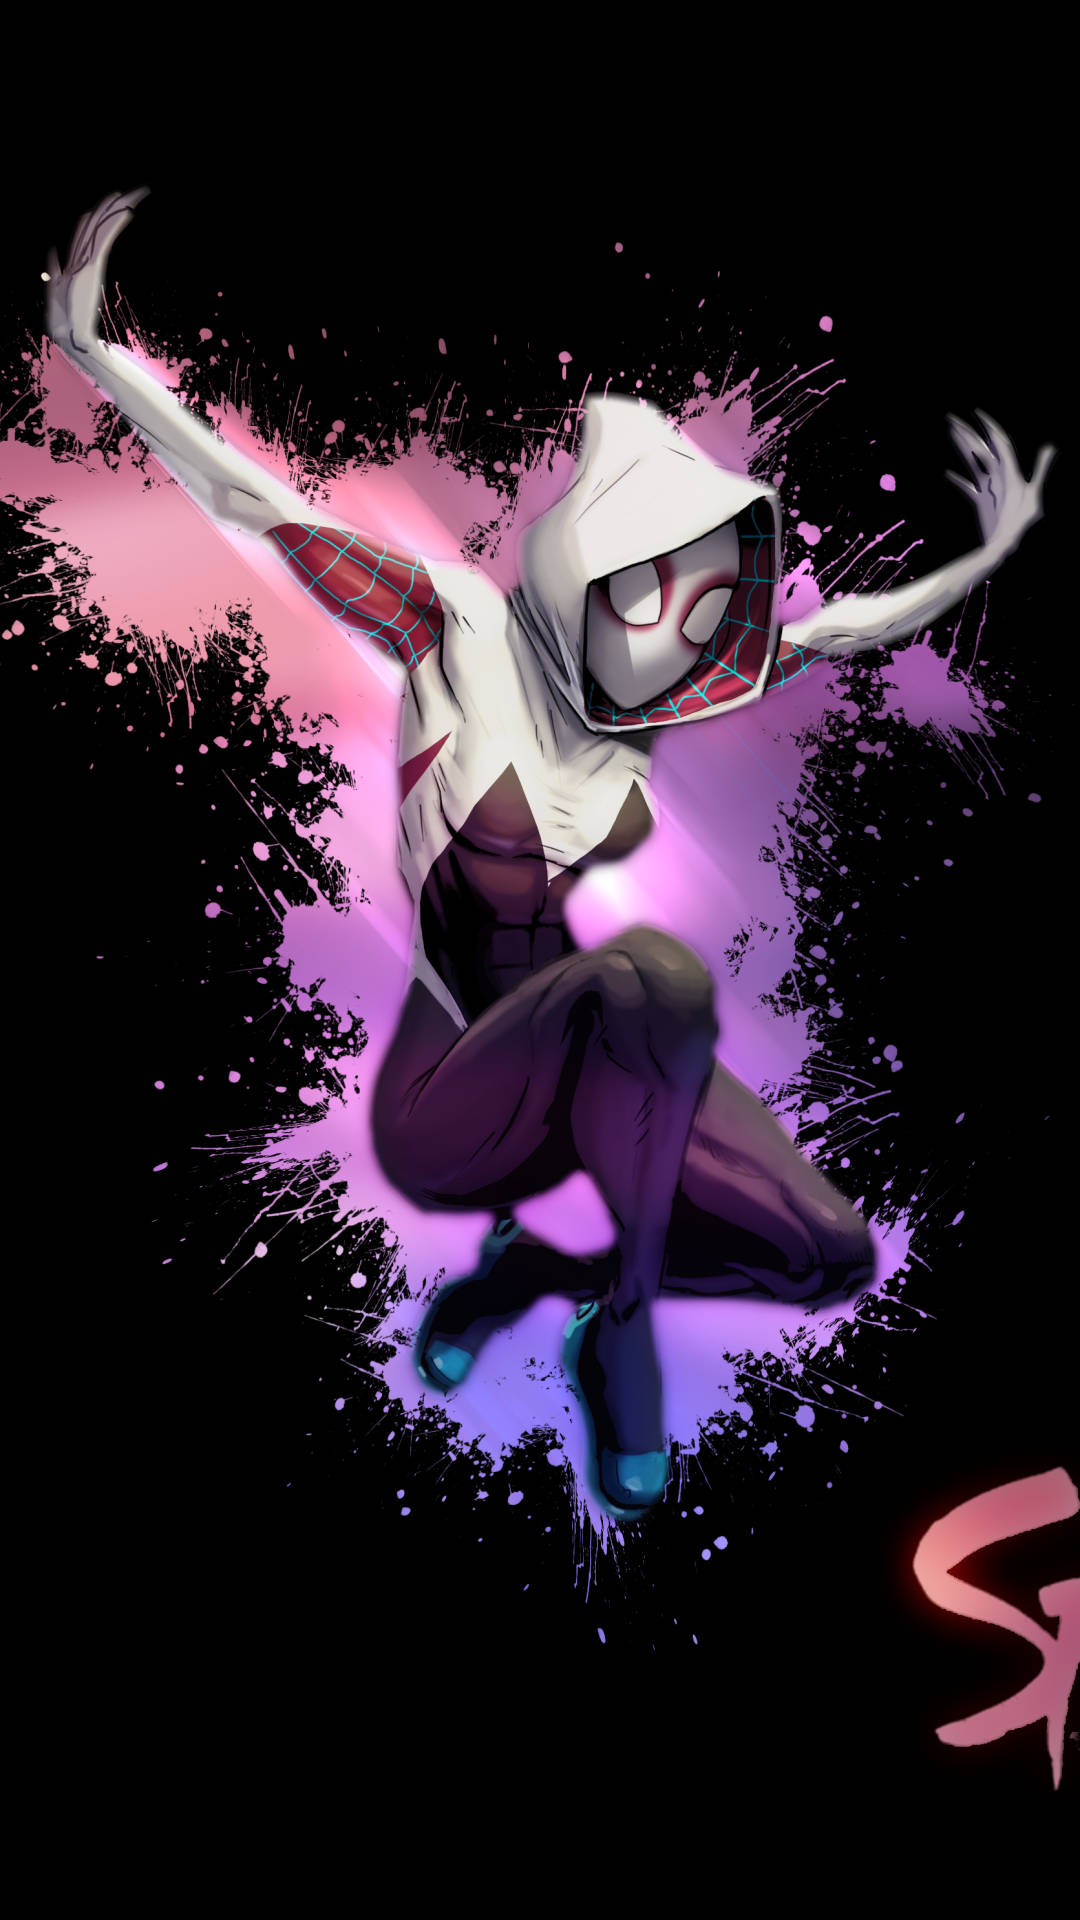 Spider Gwen in a vibrant pink and purple suit Wallpaper